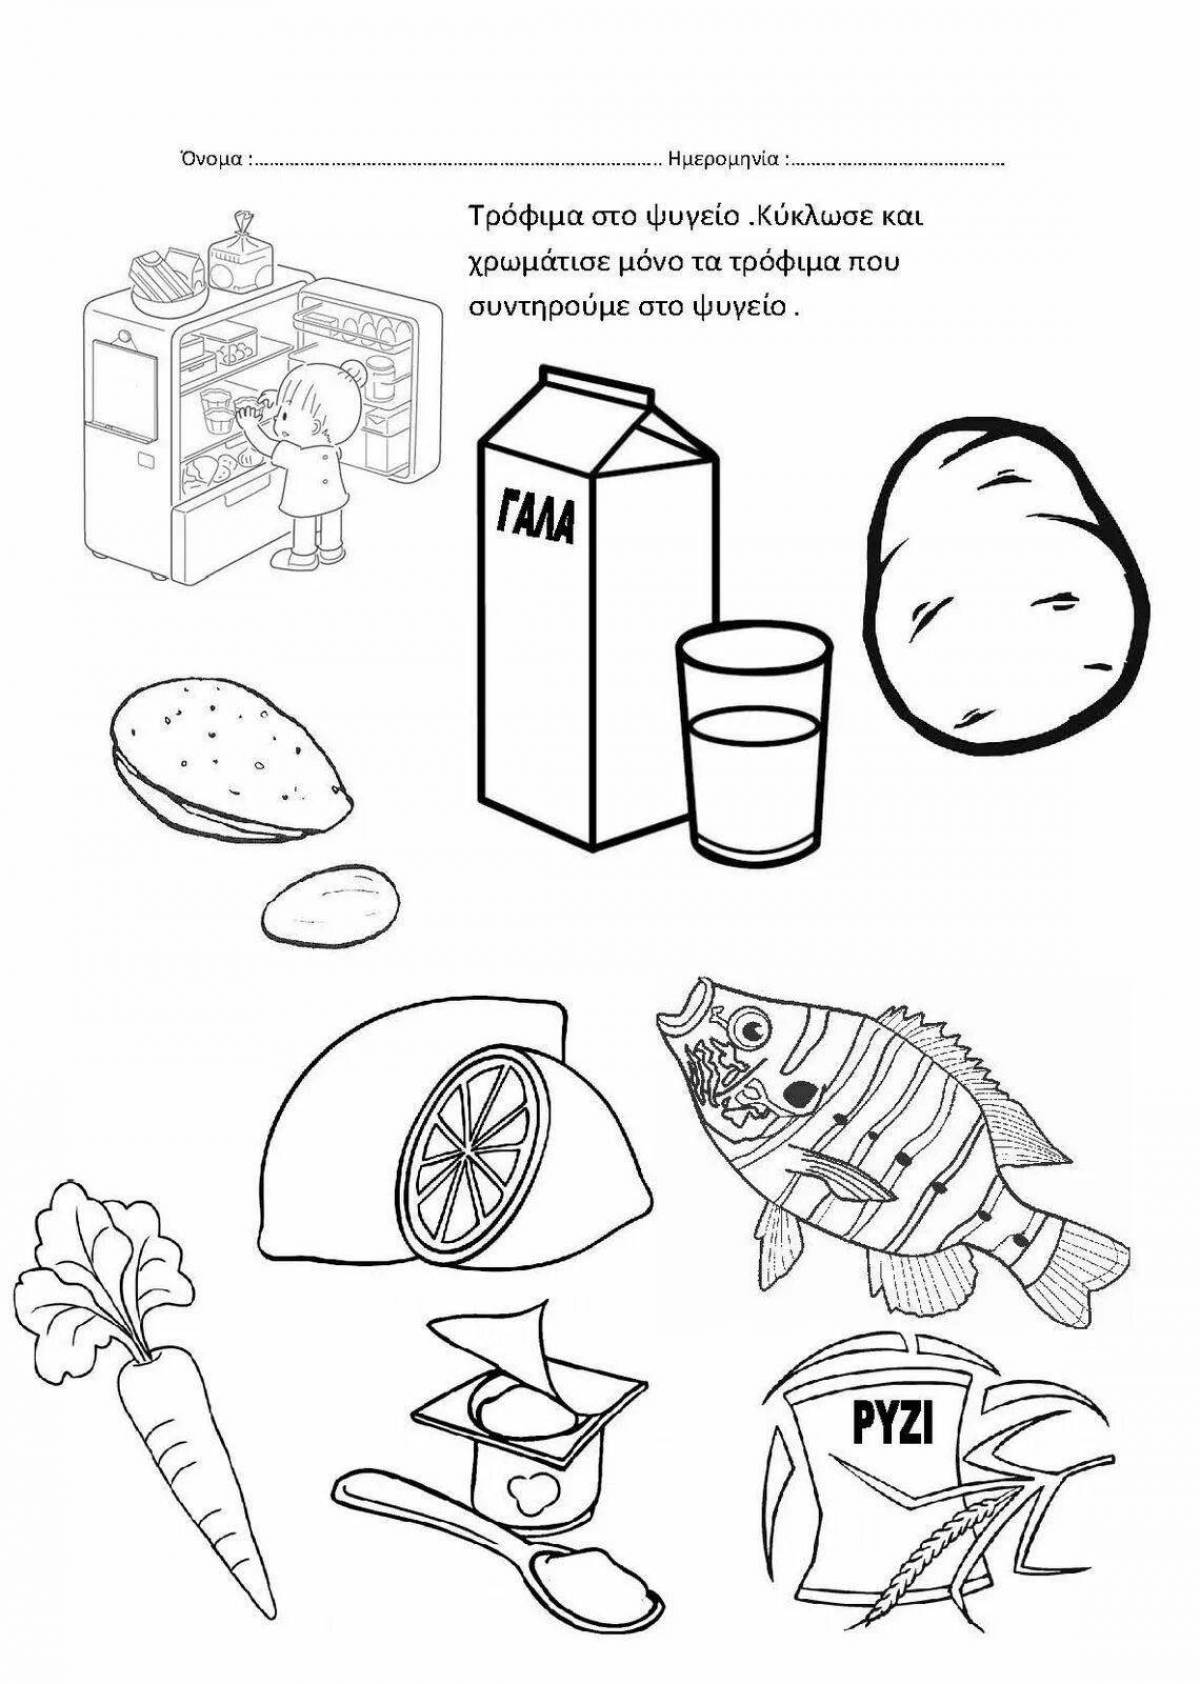 Fun food coloring book for kids 6-7 years old